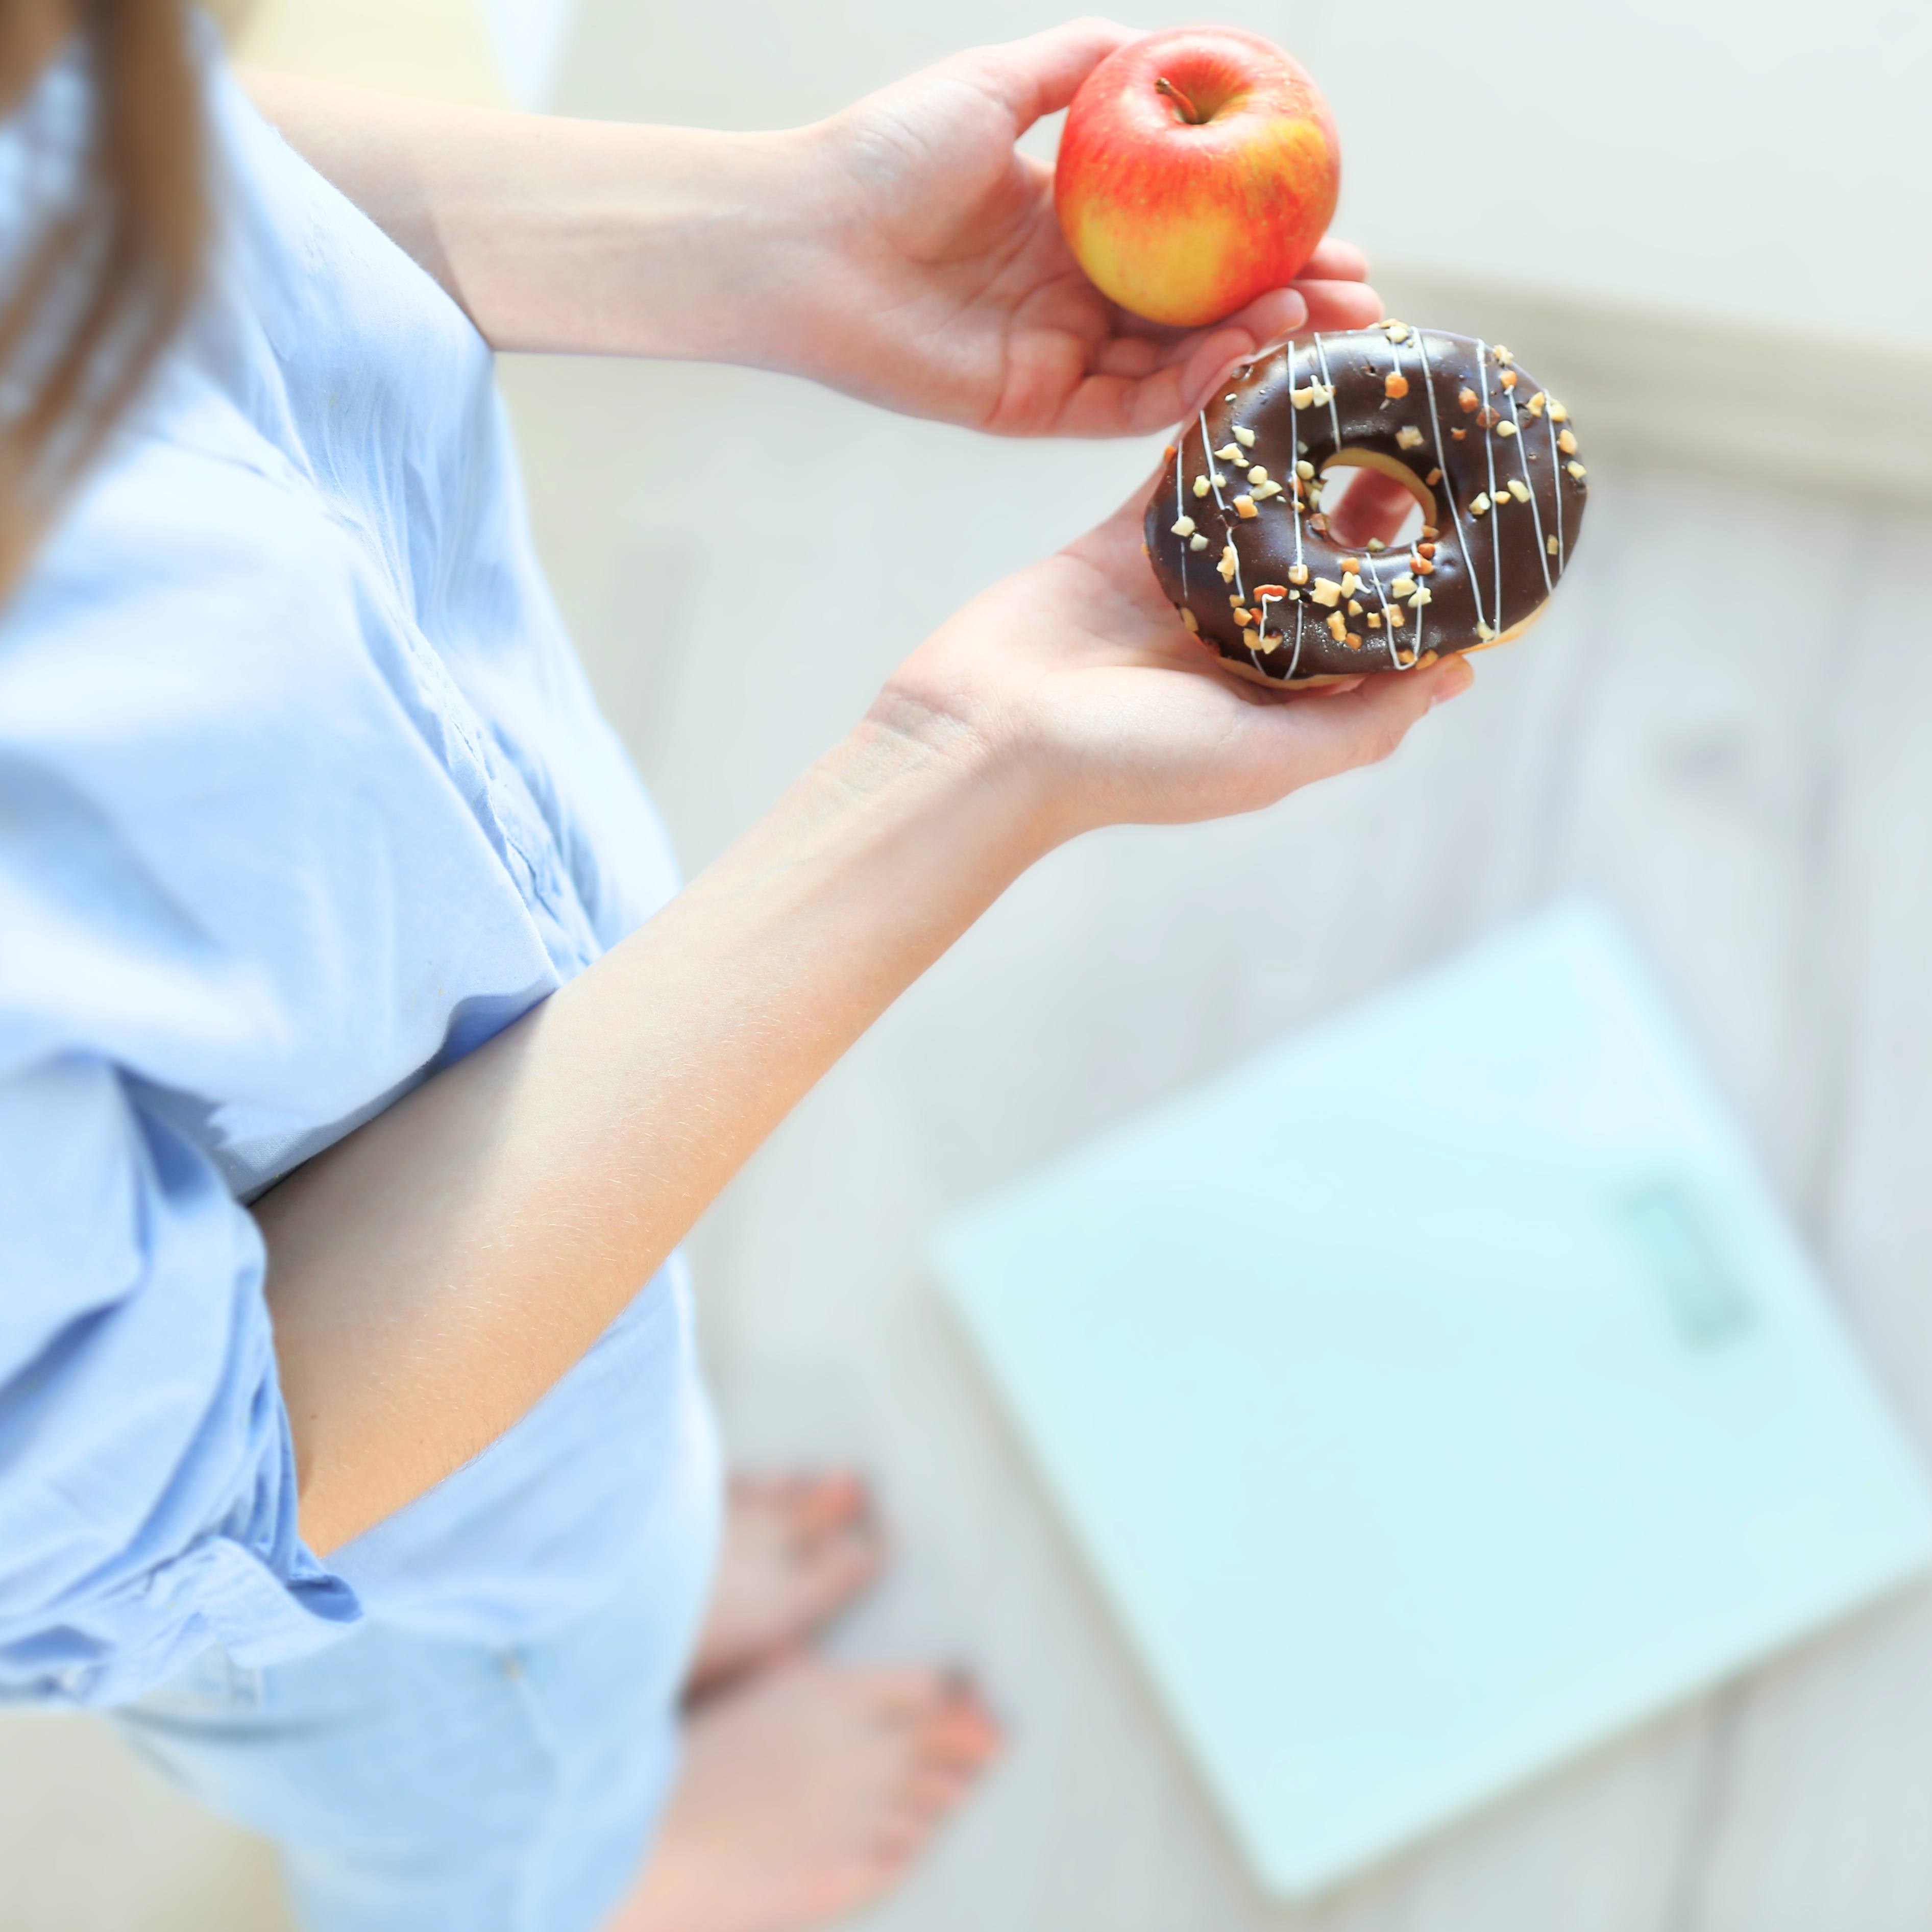 https://newsnetwork.mayoclinic.org/n7-mcnn/7bcc9724adf7b803/uploads/2020/02/a-woman-holding-an-apple-in-one-hand-a-sprinkled-donut-in-the-other-while-standing-near-a-scale-to-weigh-herself-1x1-1.jpg